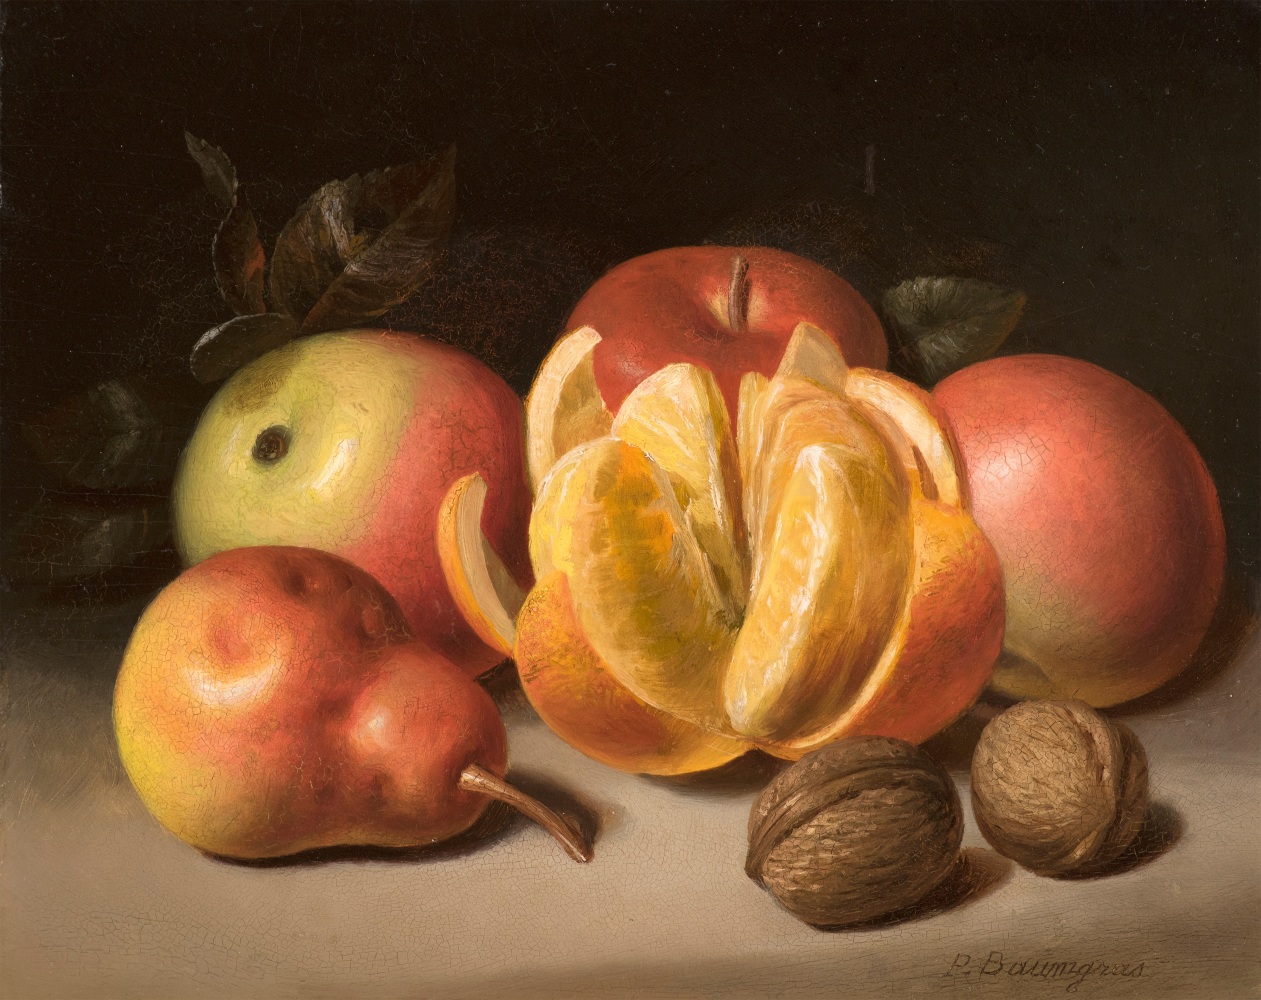 Peter Baumgras (1827–1903), Still Life: Apples, Orange, Pear and Nuts, c. 1860, oil on academy board, 8 x 10 in., signed lower right: P. Baumgras